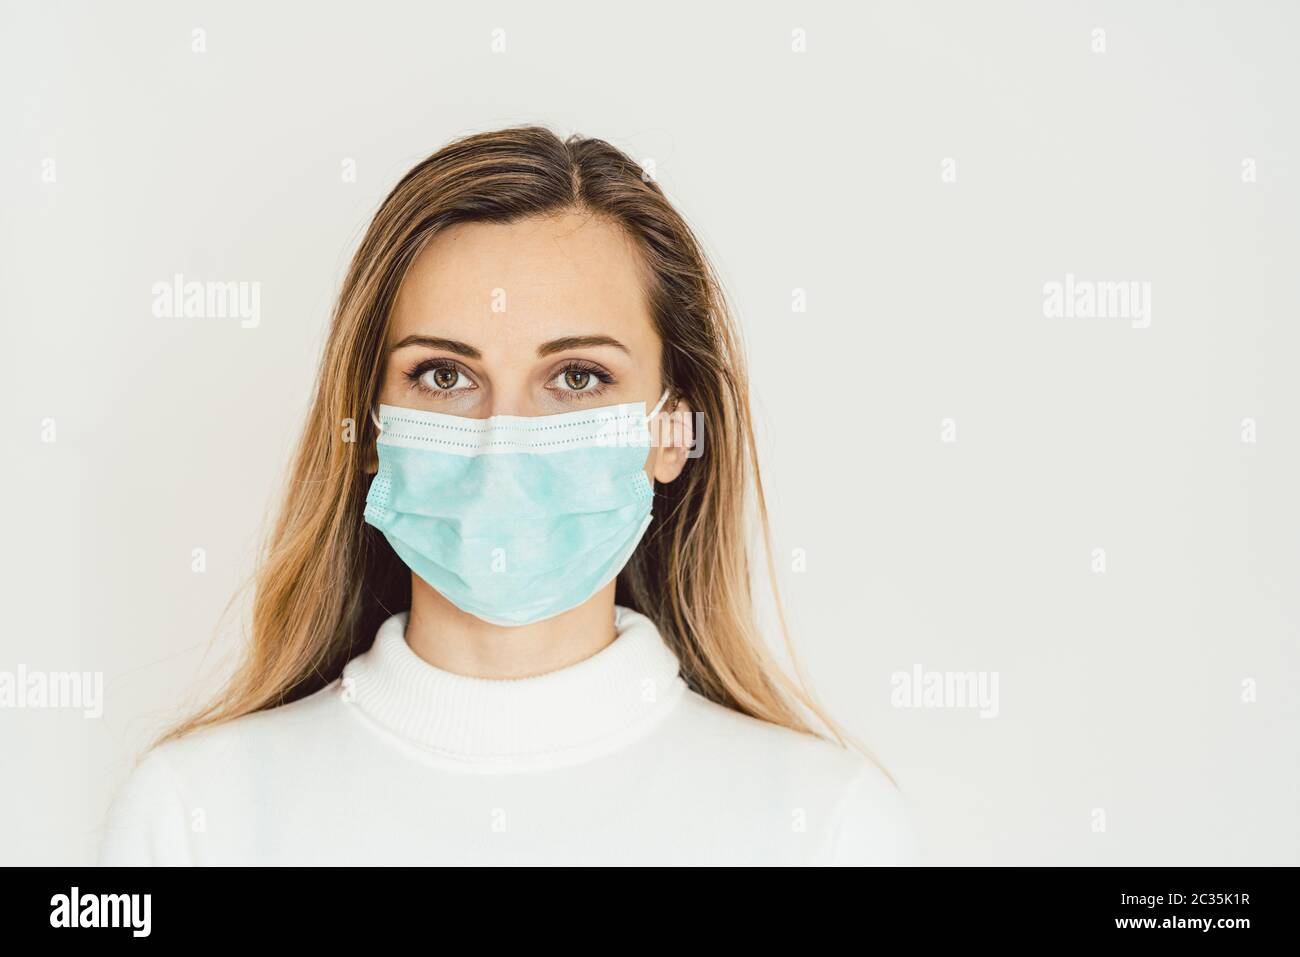 Woman with corona mask protecting her from Covid-19 staying at home in quarantine Stock Photo